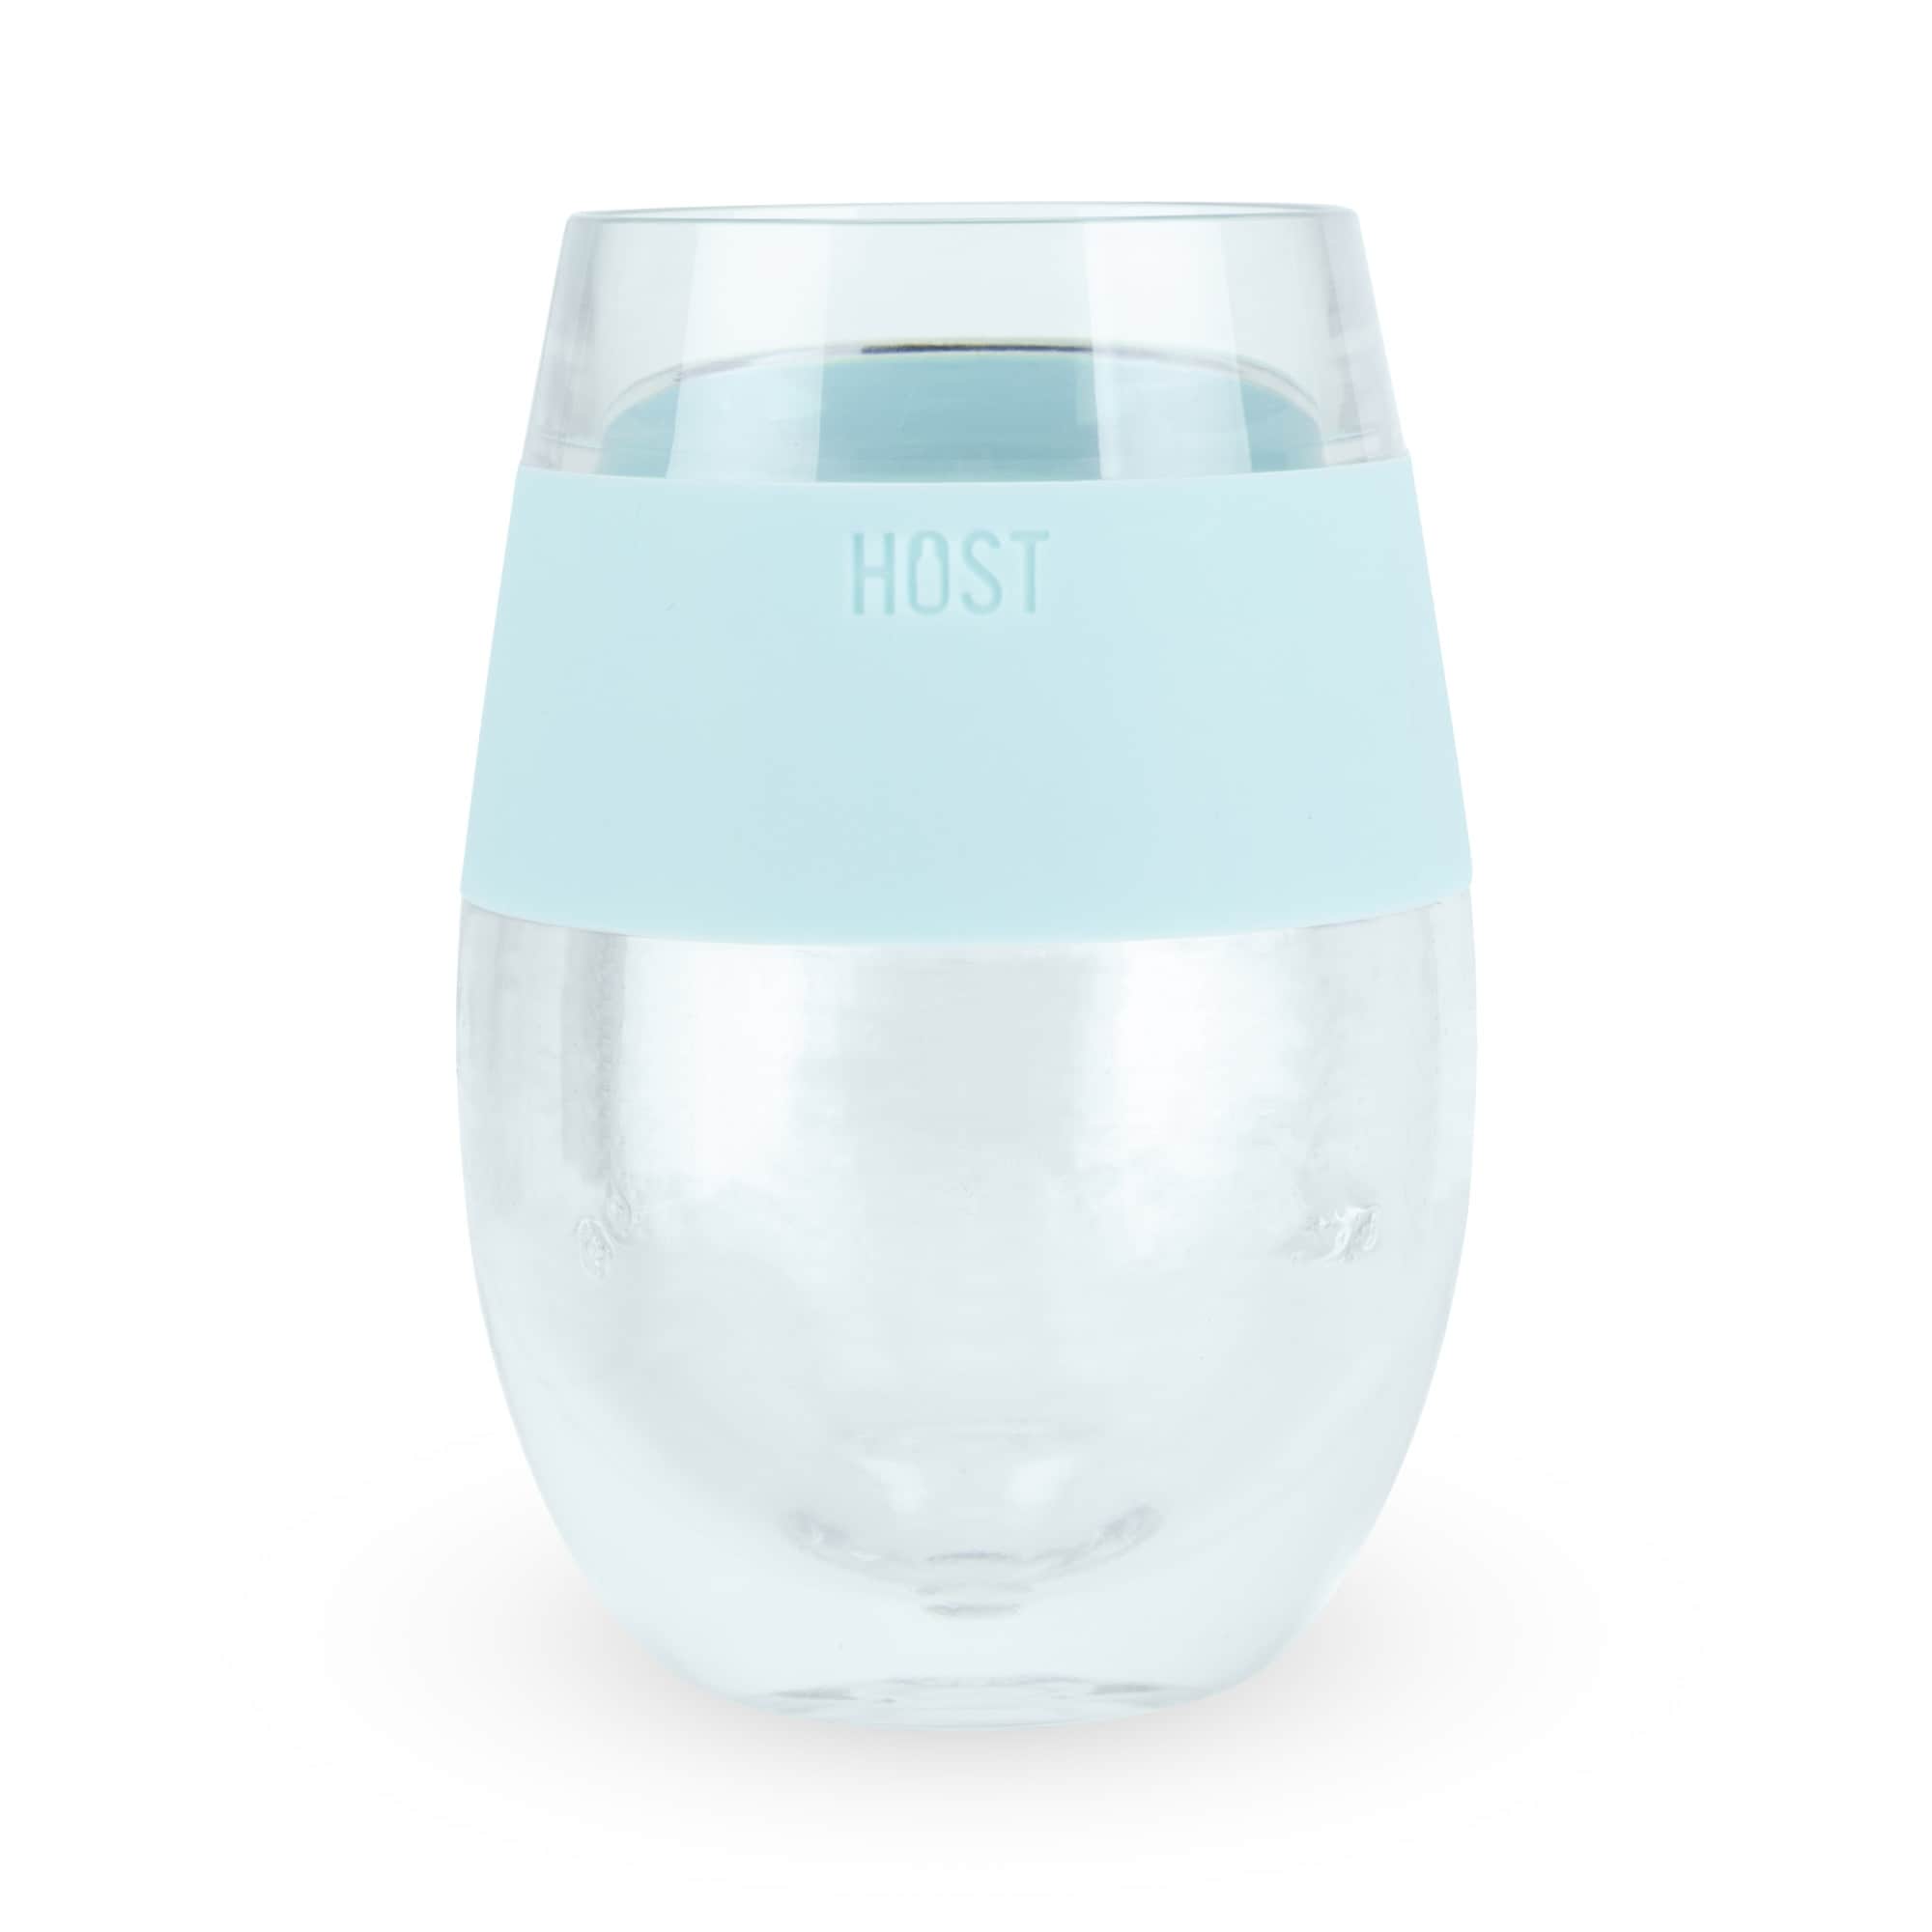 https://ak1.ostkcdn.com/images/products/is/images/direct/5733158b706d4ba849c9e5bcc4217f499ad12169/Wine-FREEZE-Cooling-cup-Translucent-Ice-Single.jpg